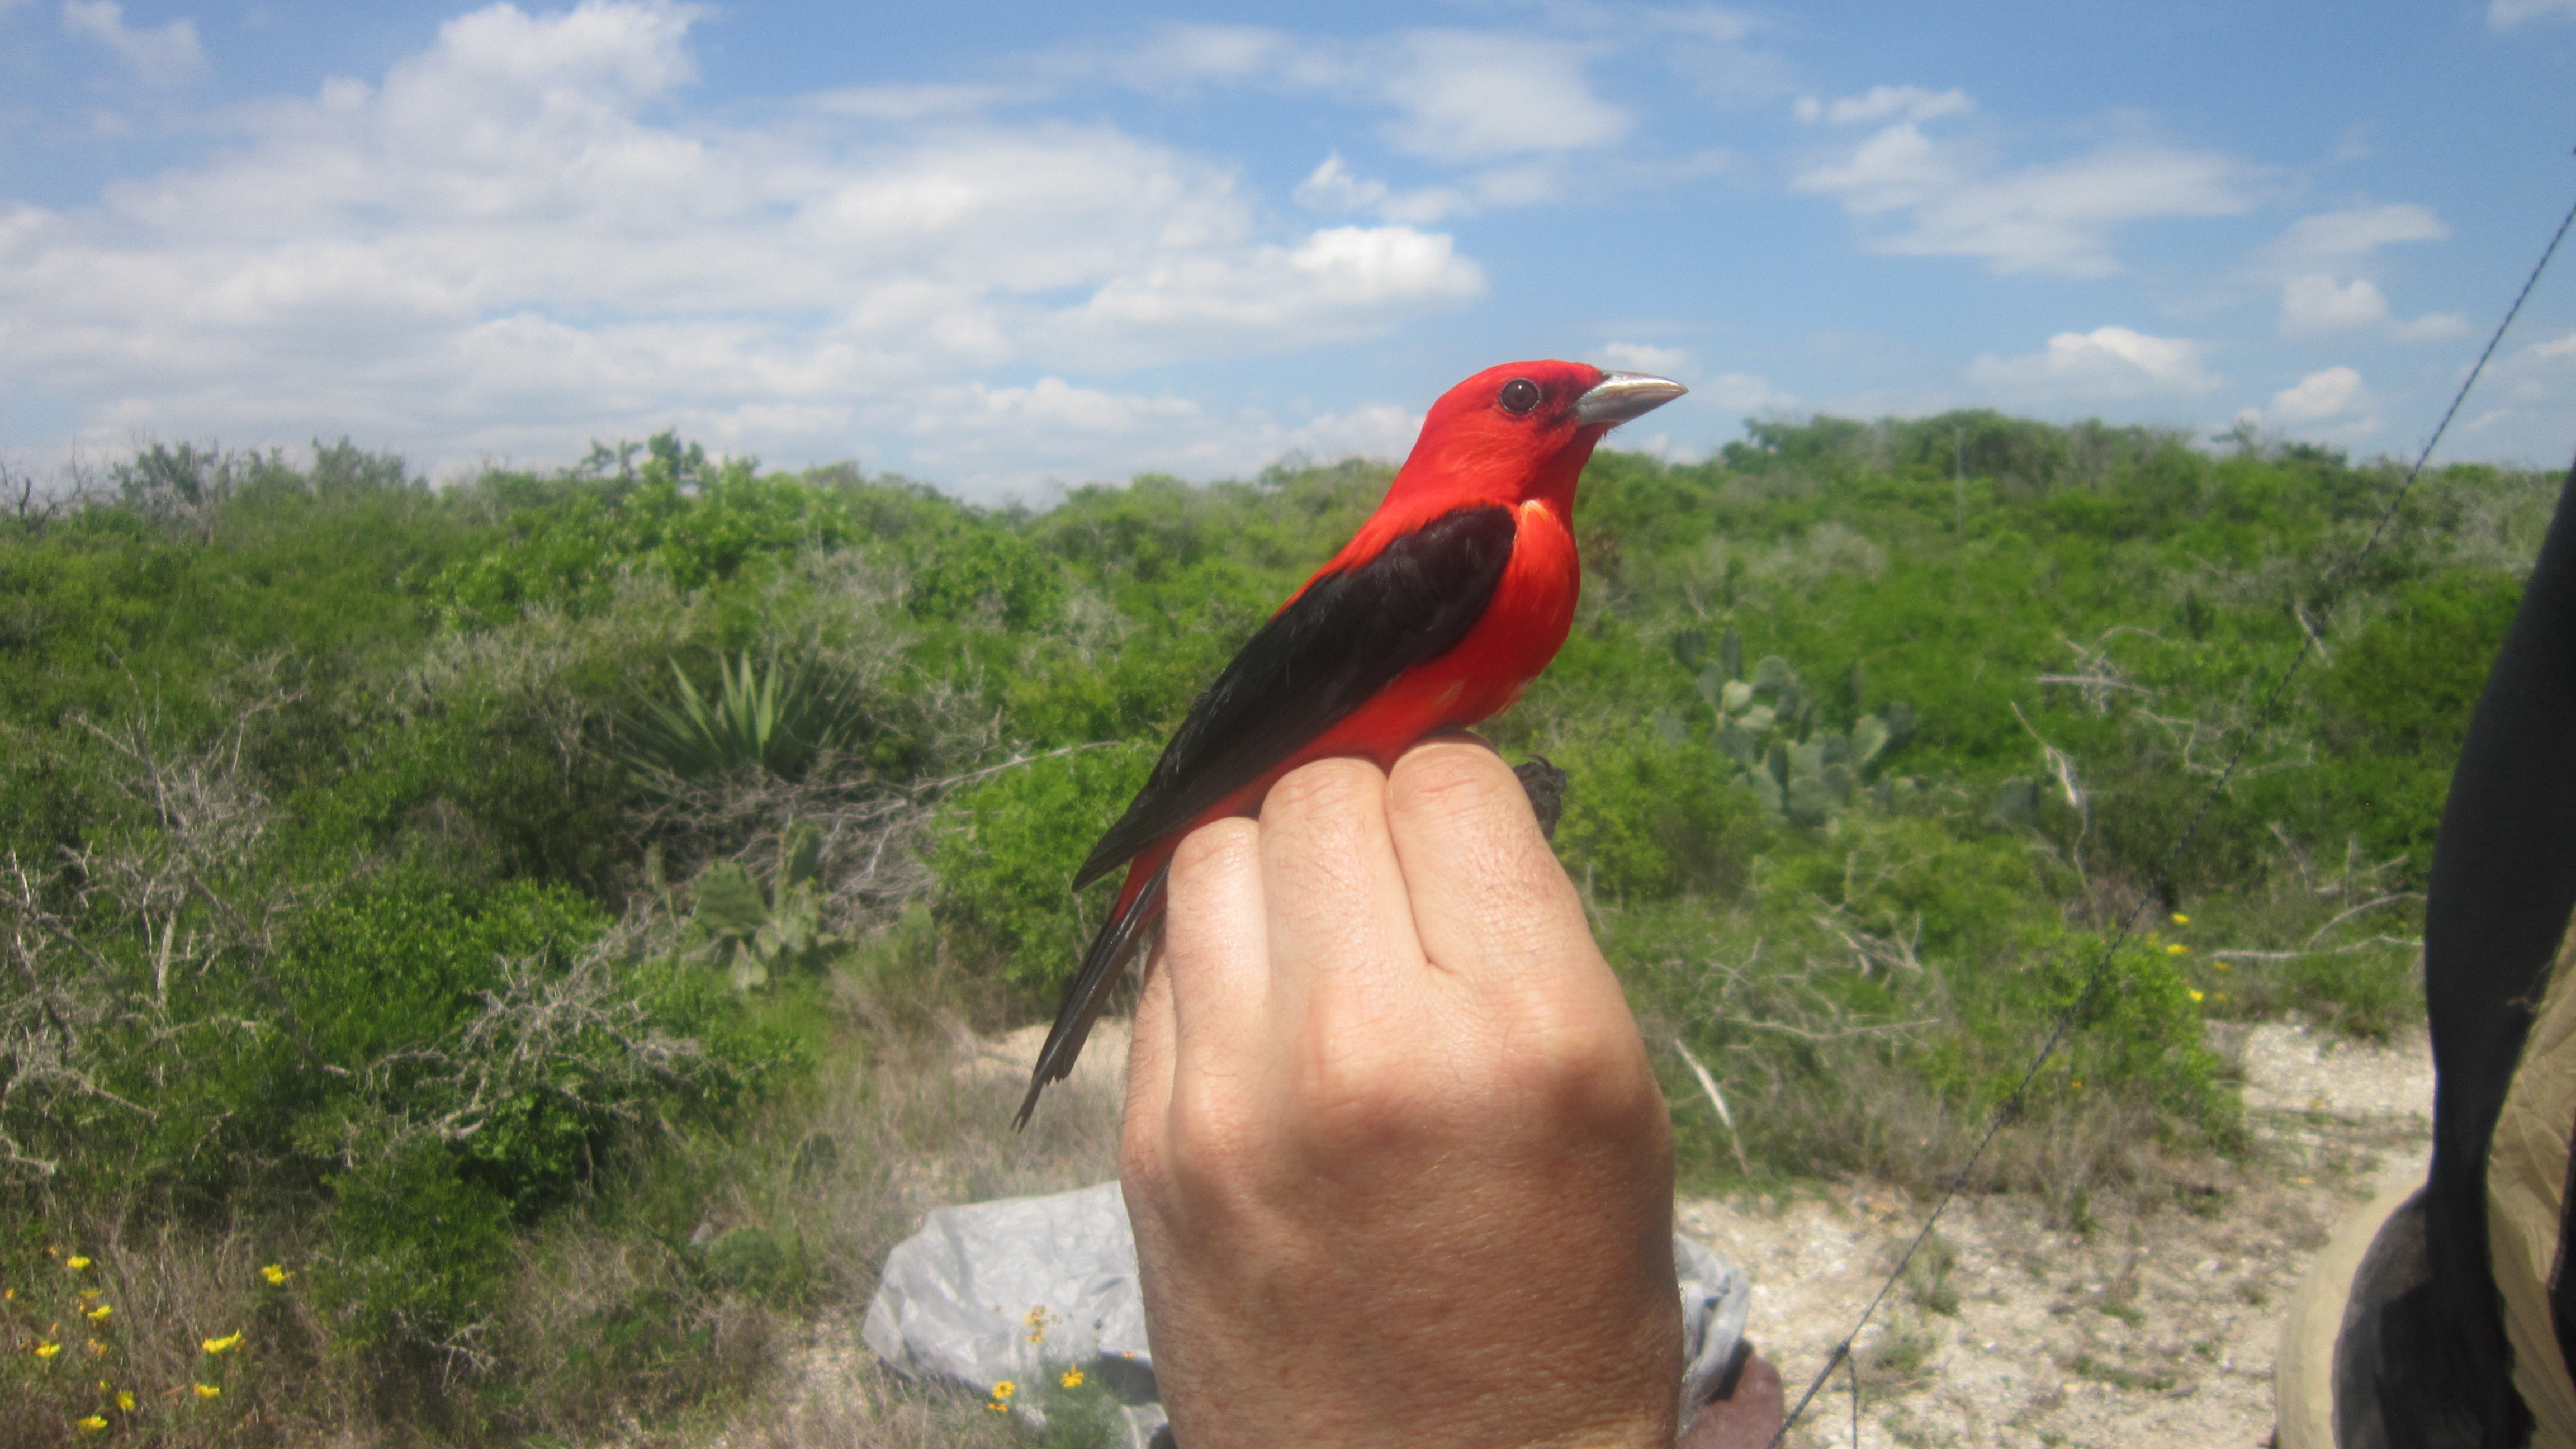 A scarlet tanager perched on someone's hand